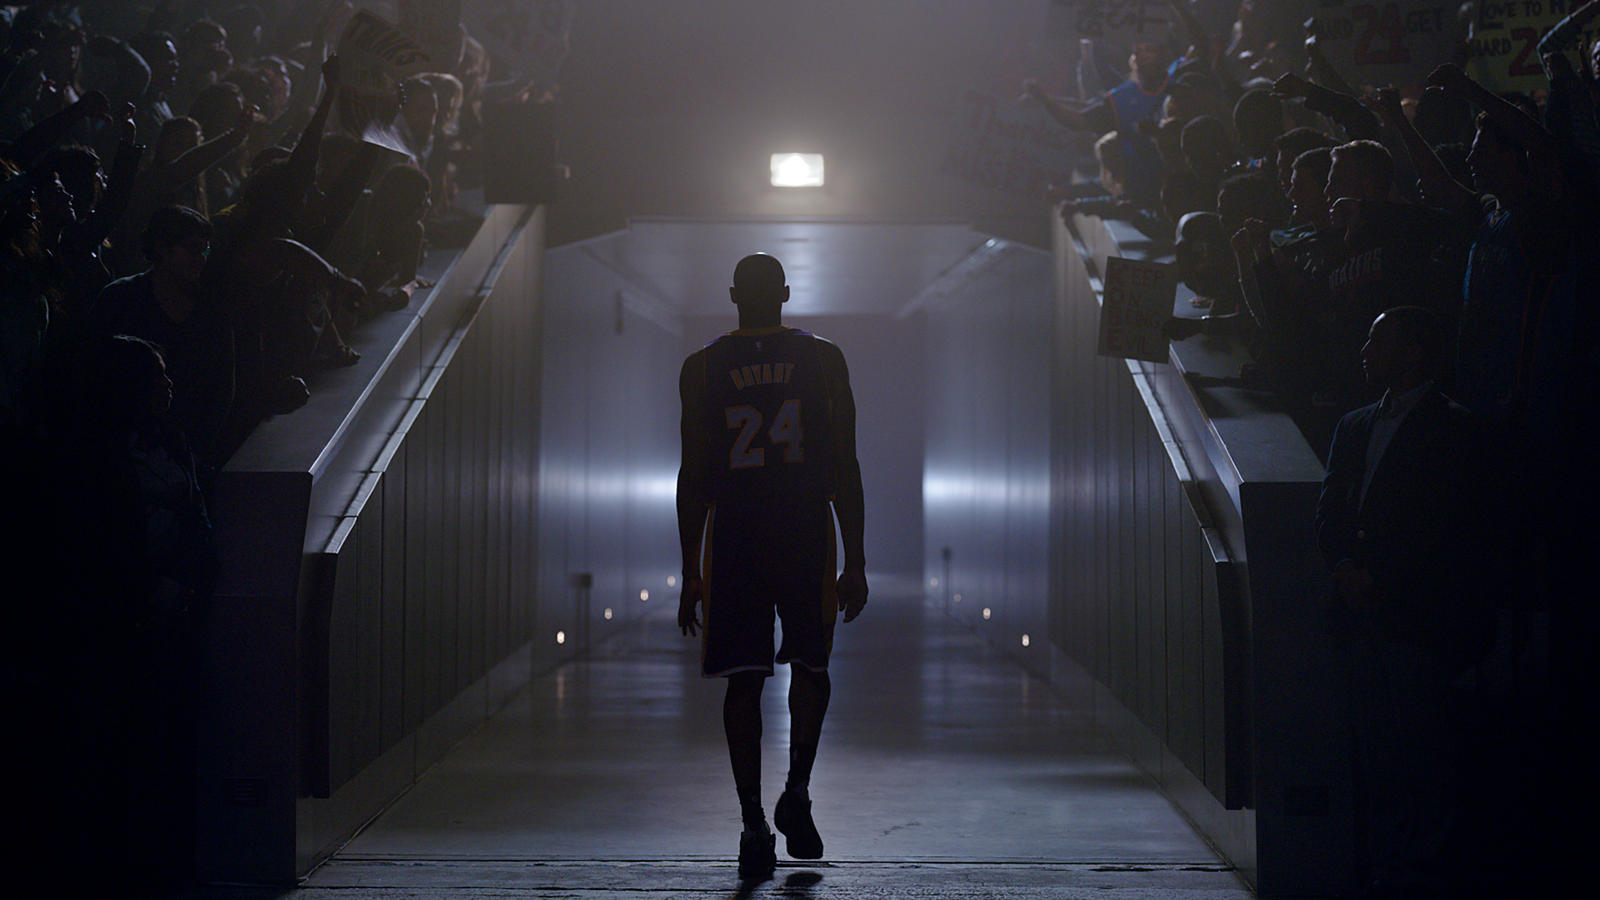 kobe bryant Nike commercial retirement the conductor mamba day